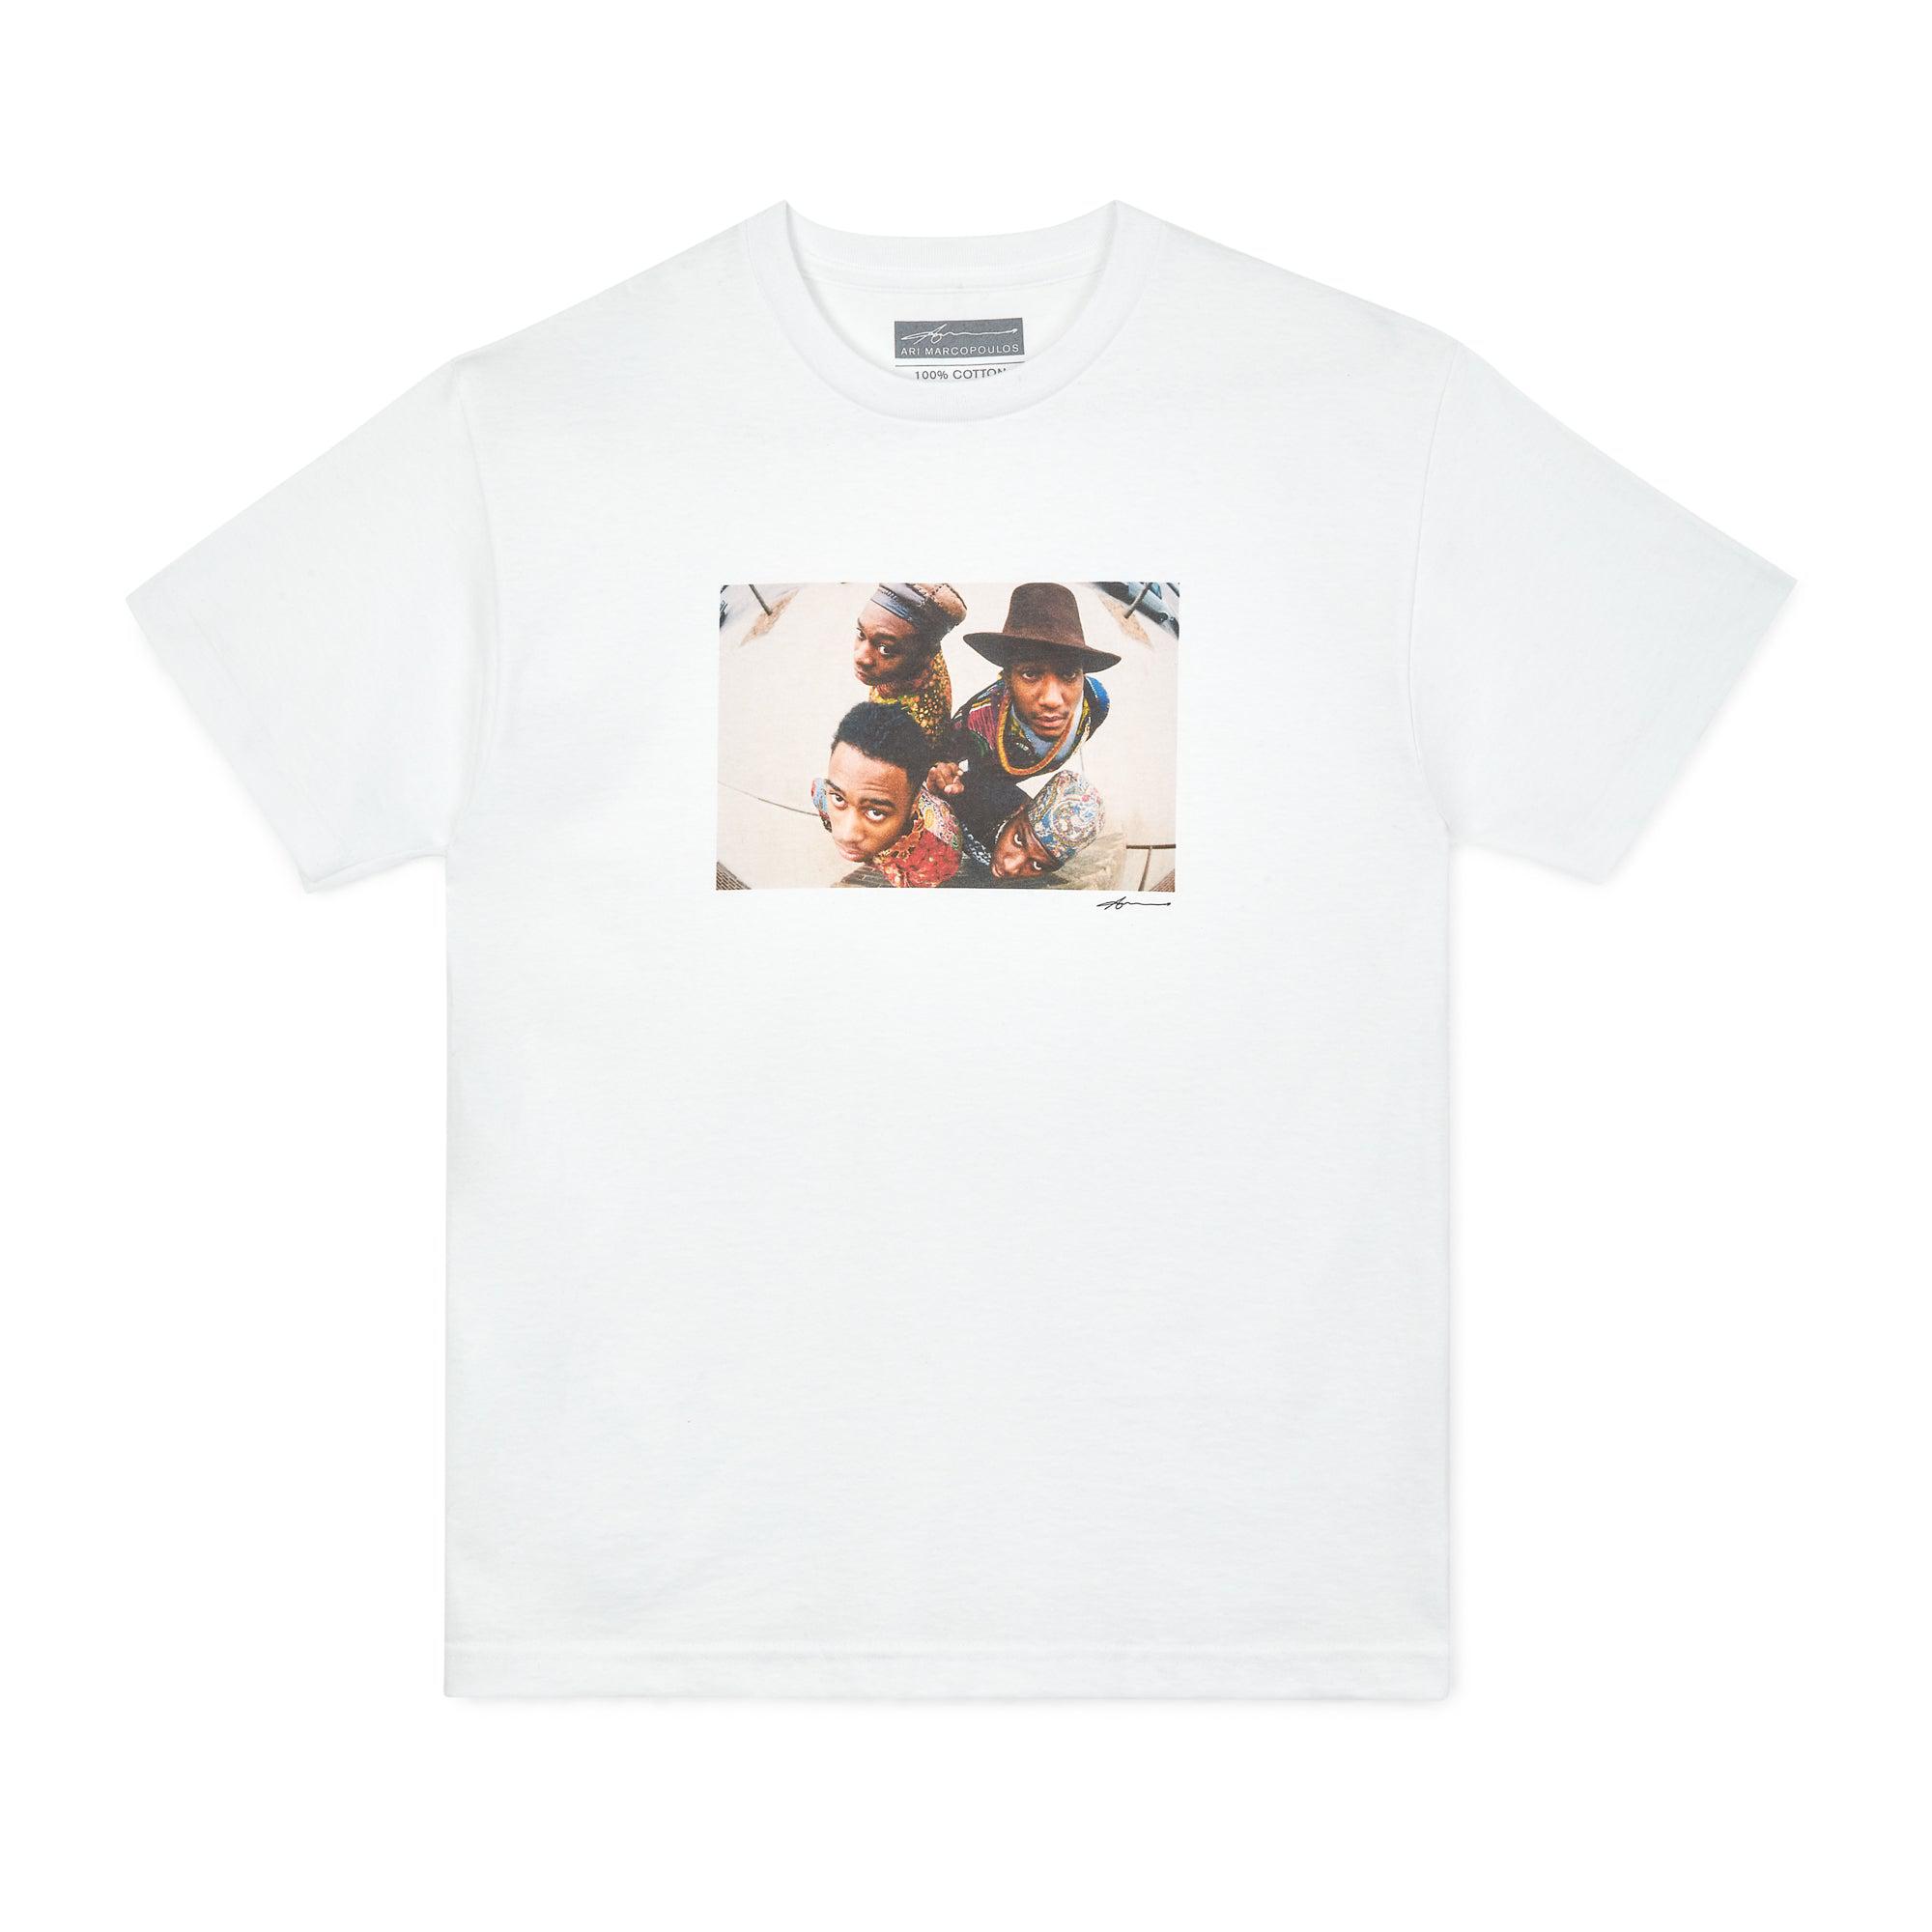 Ari Marcopoulos A Tribe Called Quest New York T-Shirt (White) by ARI MARCOPOULOS